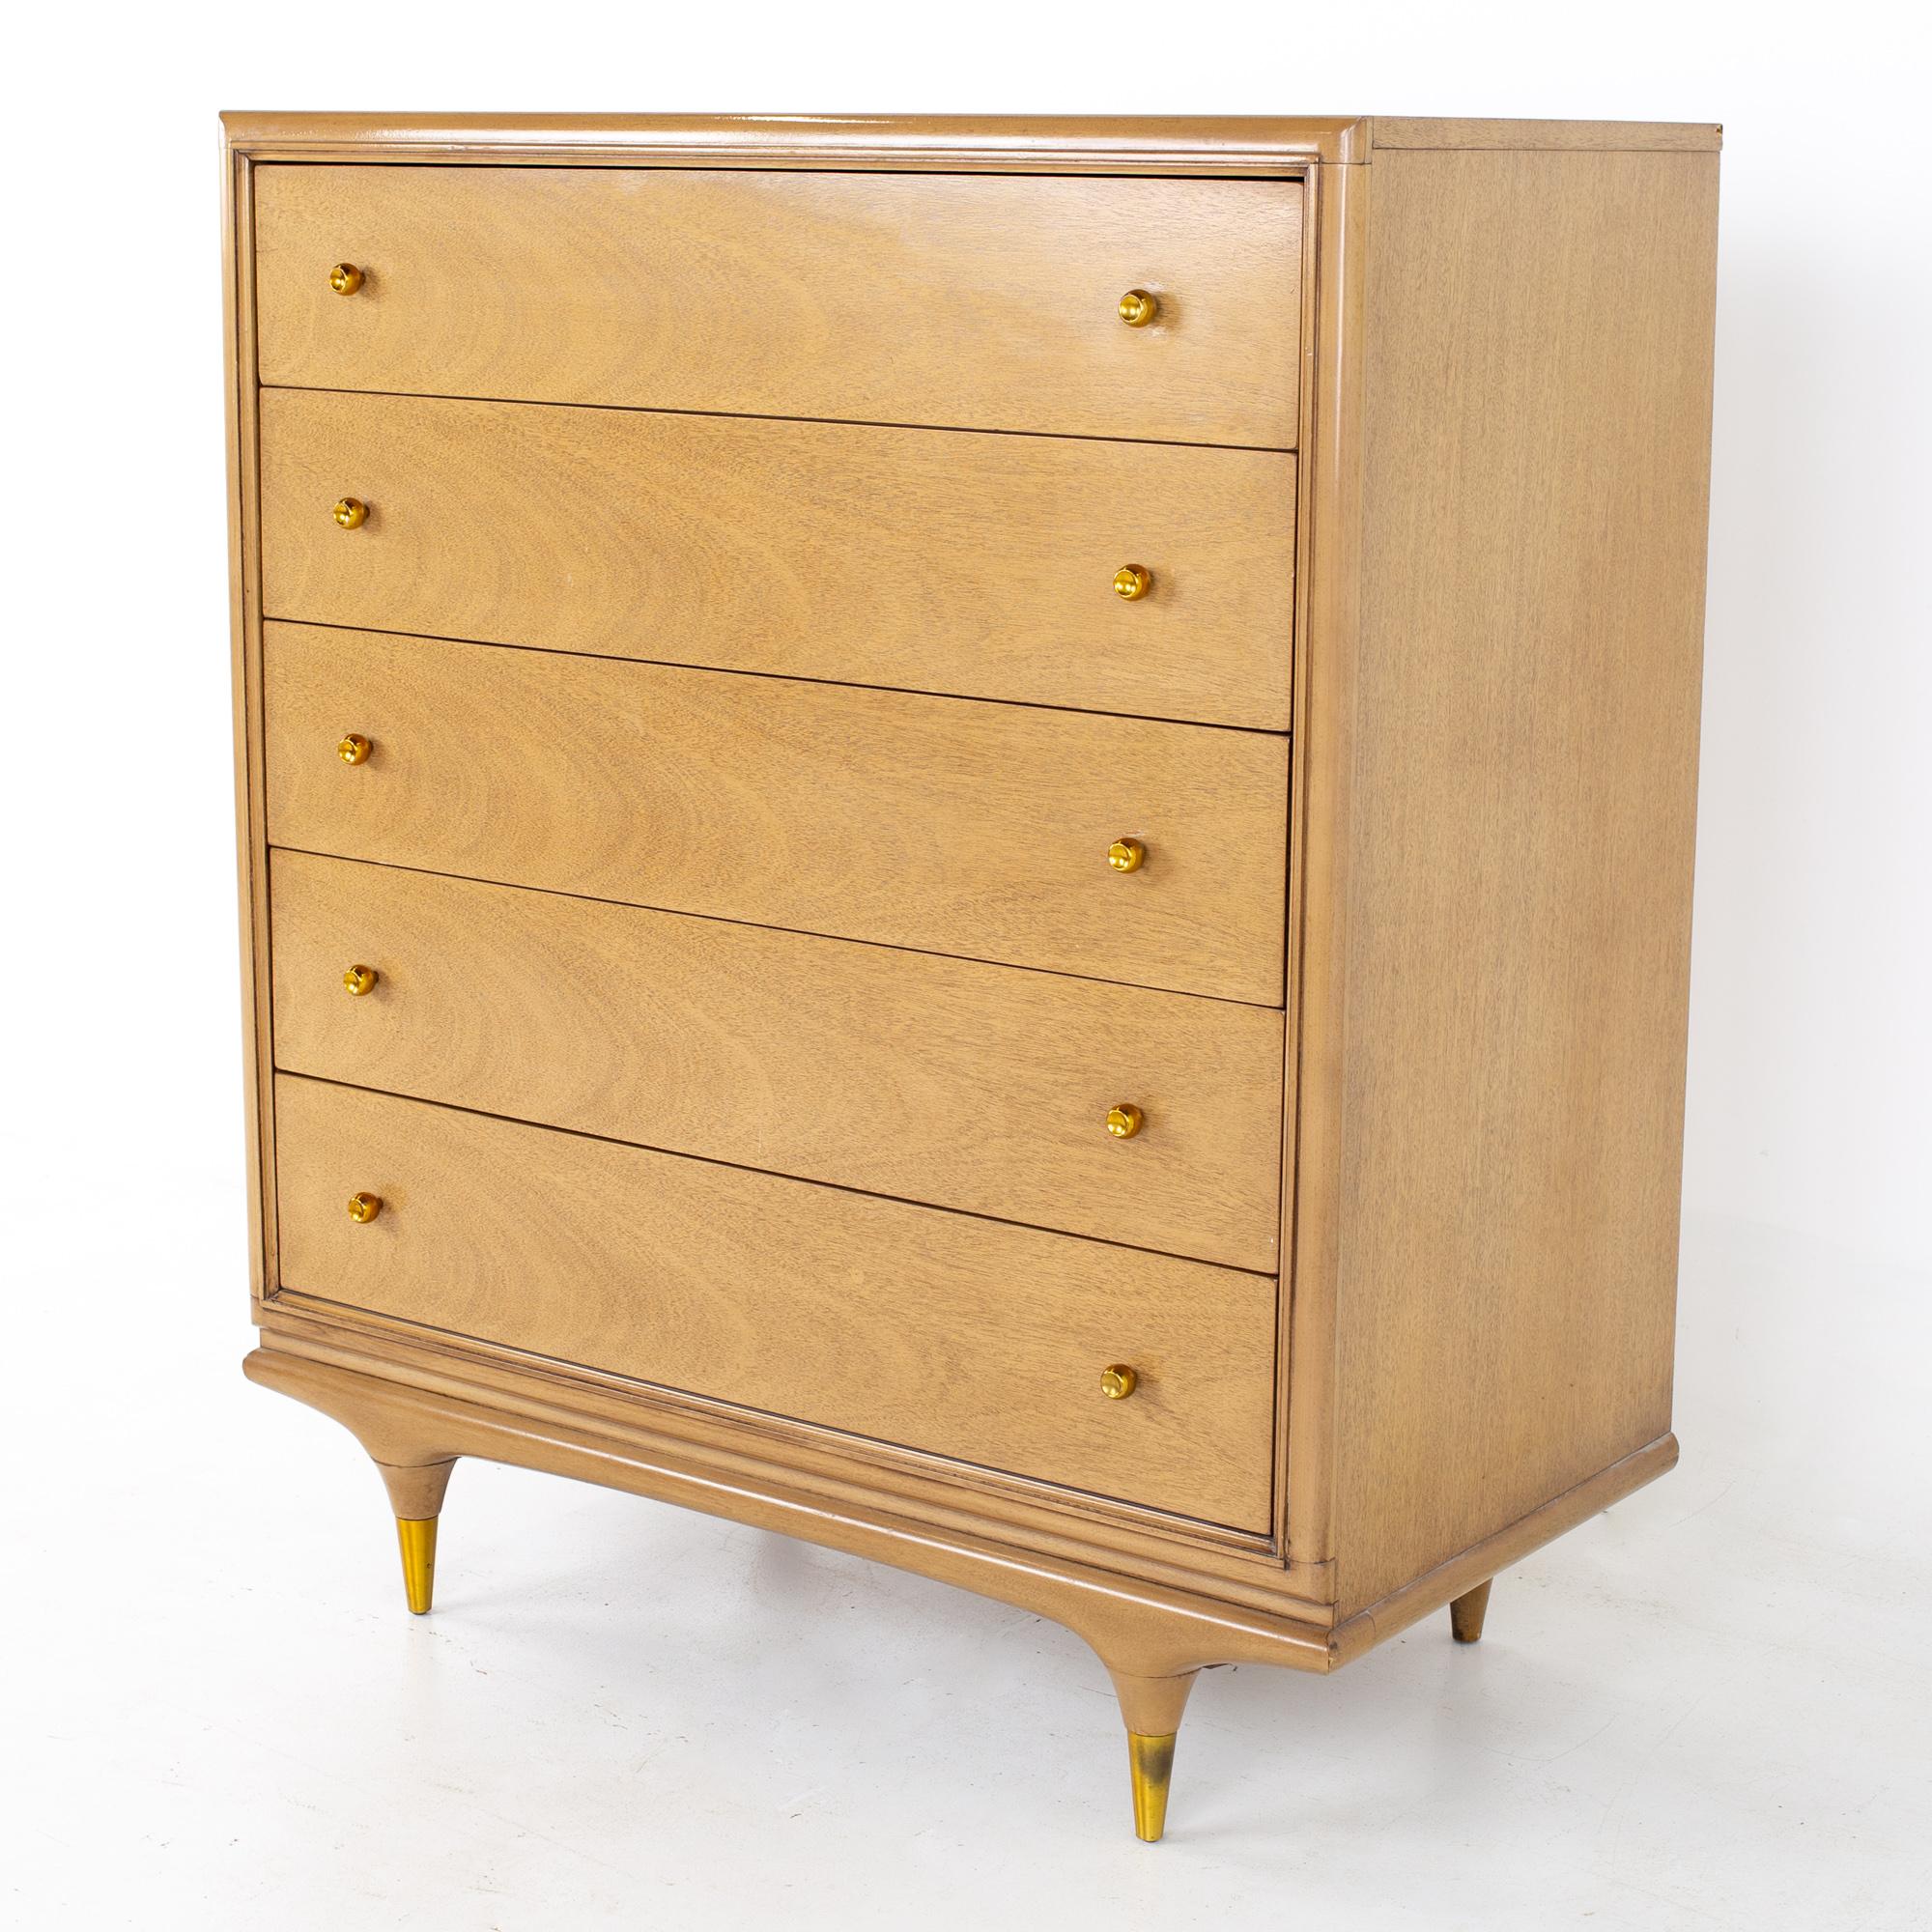 Kent Coffey Continental mid century 5 drawer highboy dresser.
Dresser measures: 40 wide x 21 deep x 47.25 inches high

All pieces of furniture can be had in what we call restored vintage condition. That means the piece is restored upon purchase